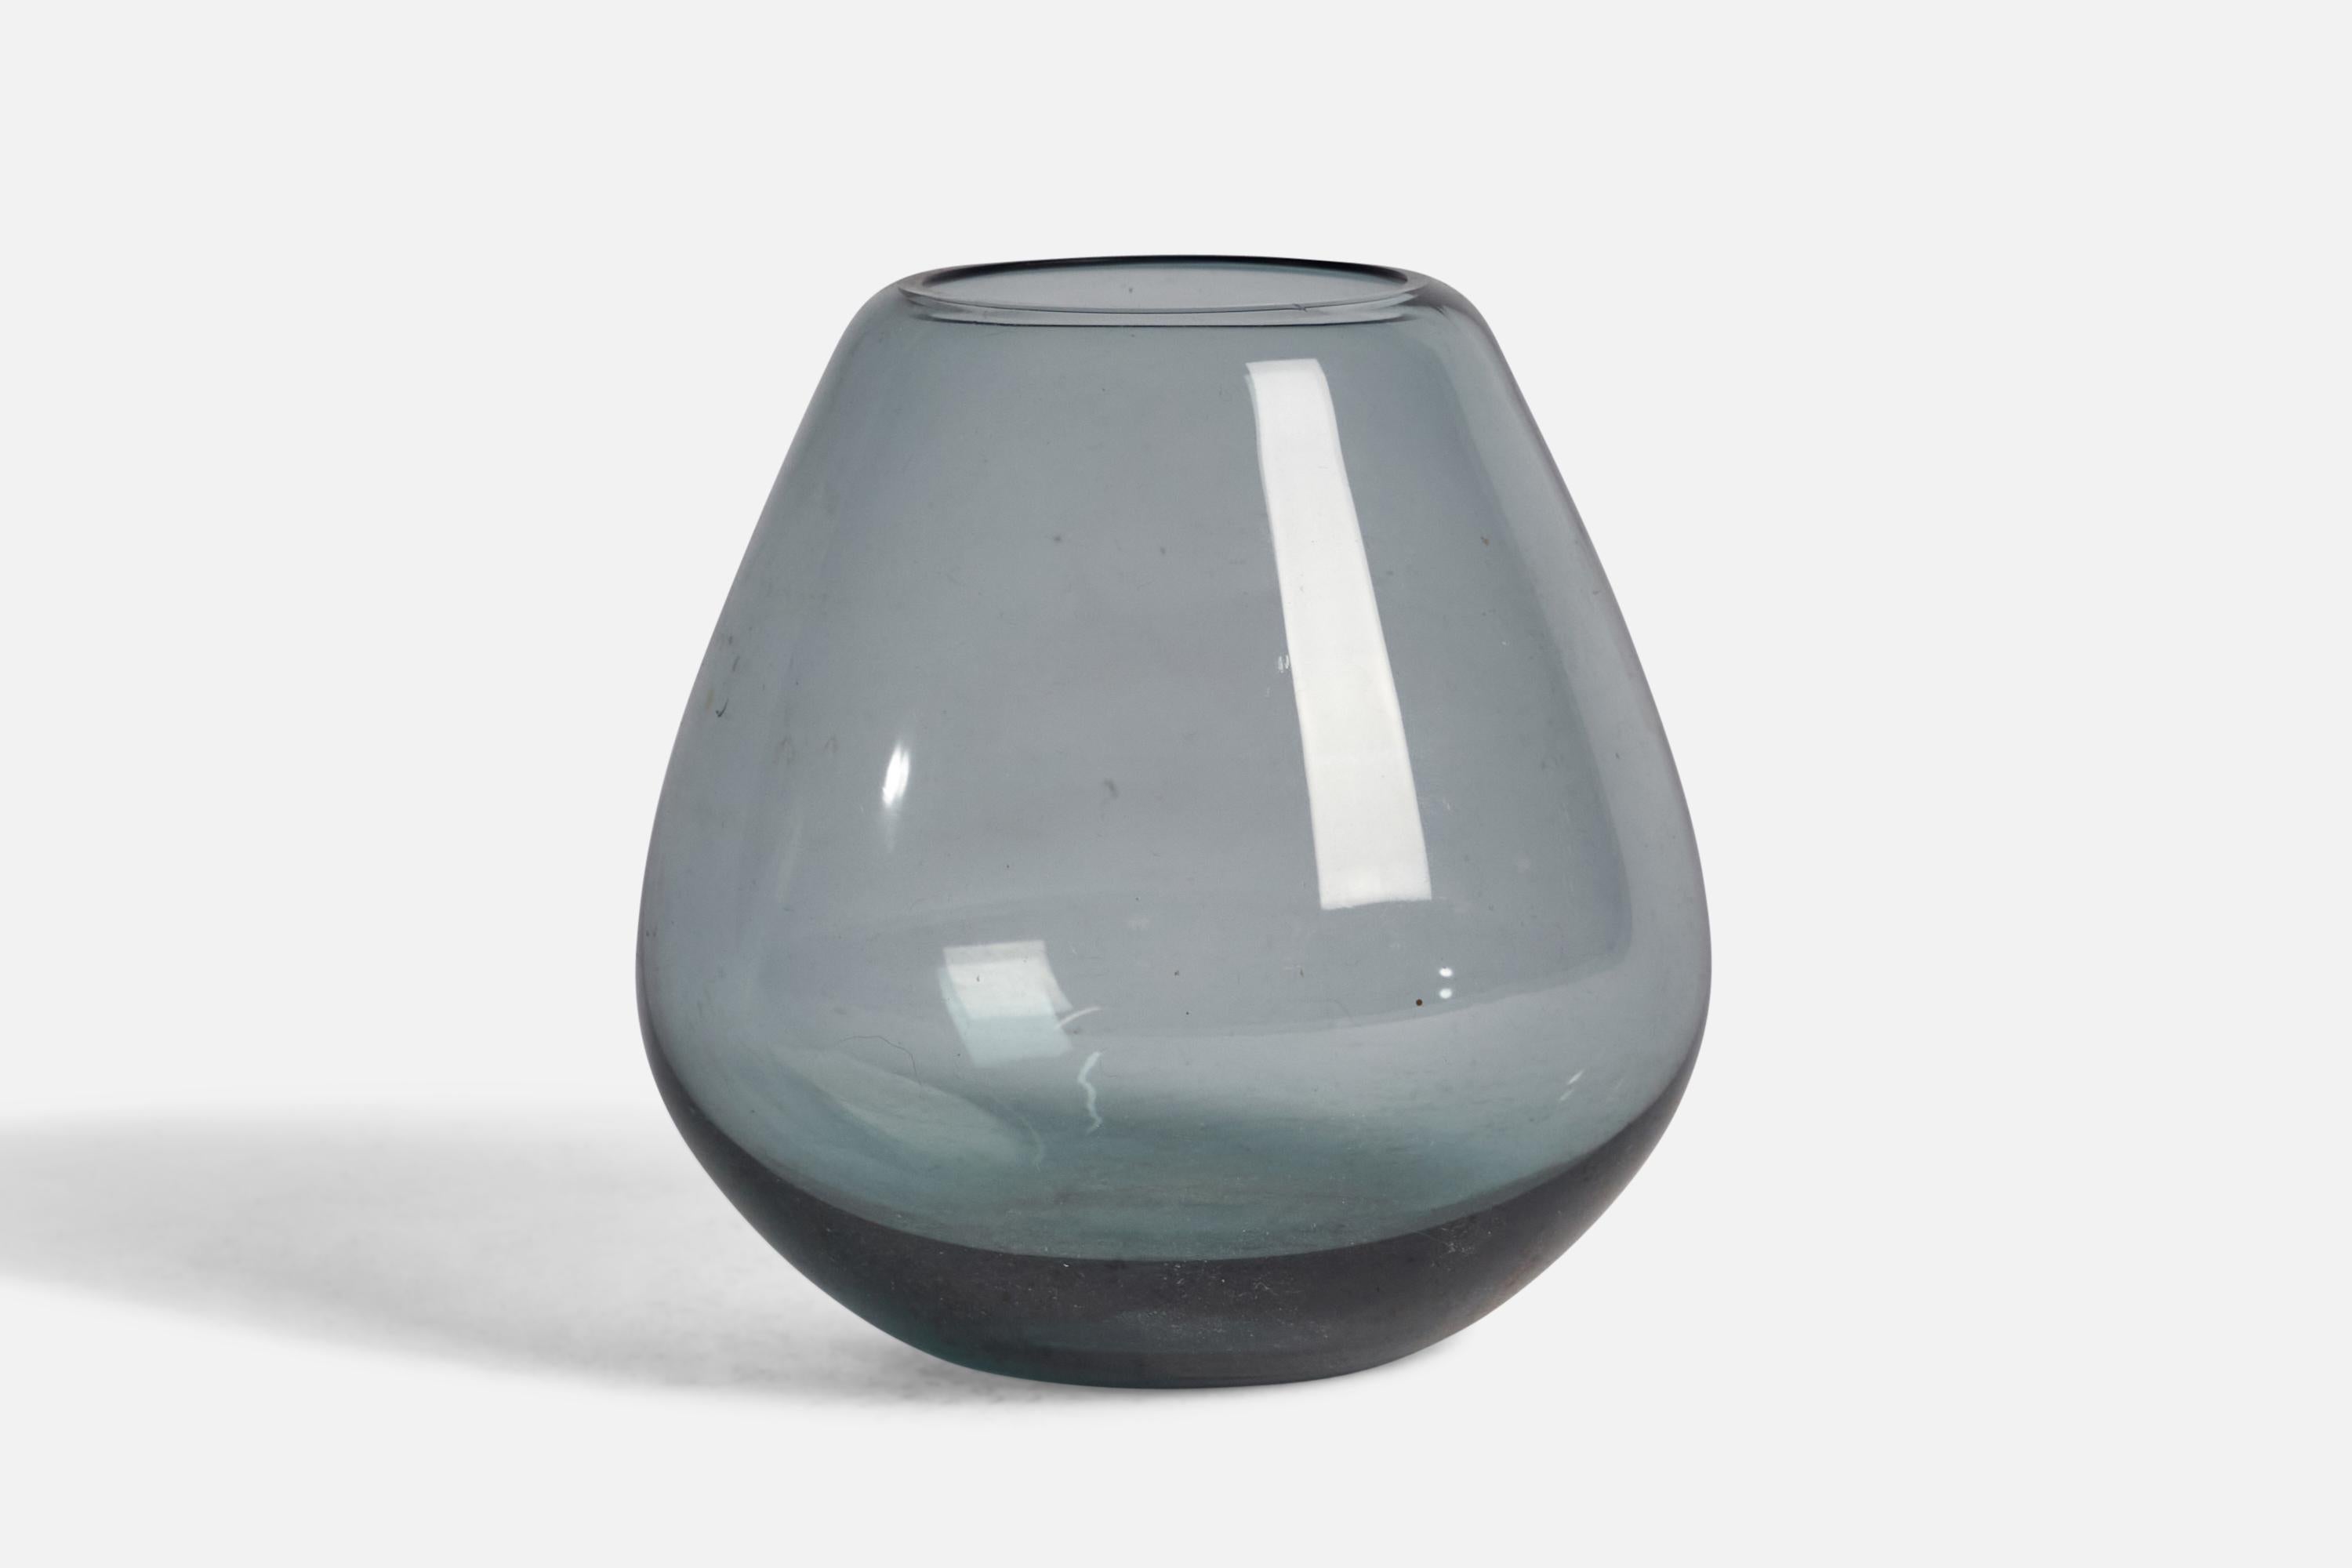 A blue-coloured glass vase designed by Wilhelm Wagenfeld and produced by WMF, Germany, c. 1950s.